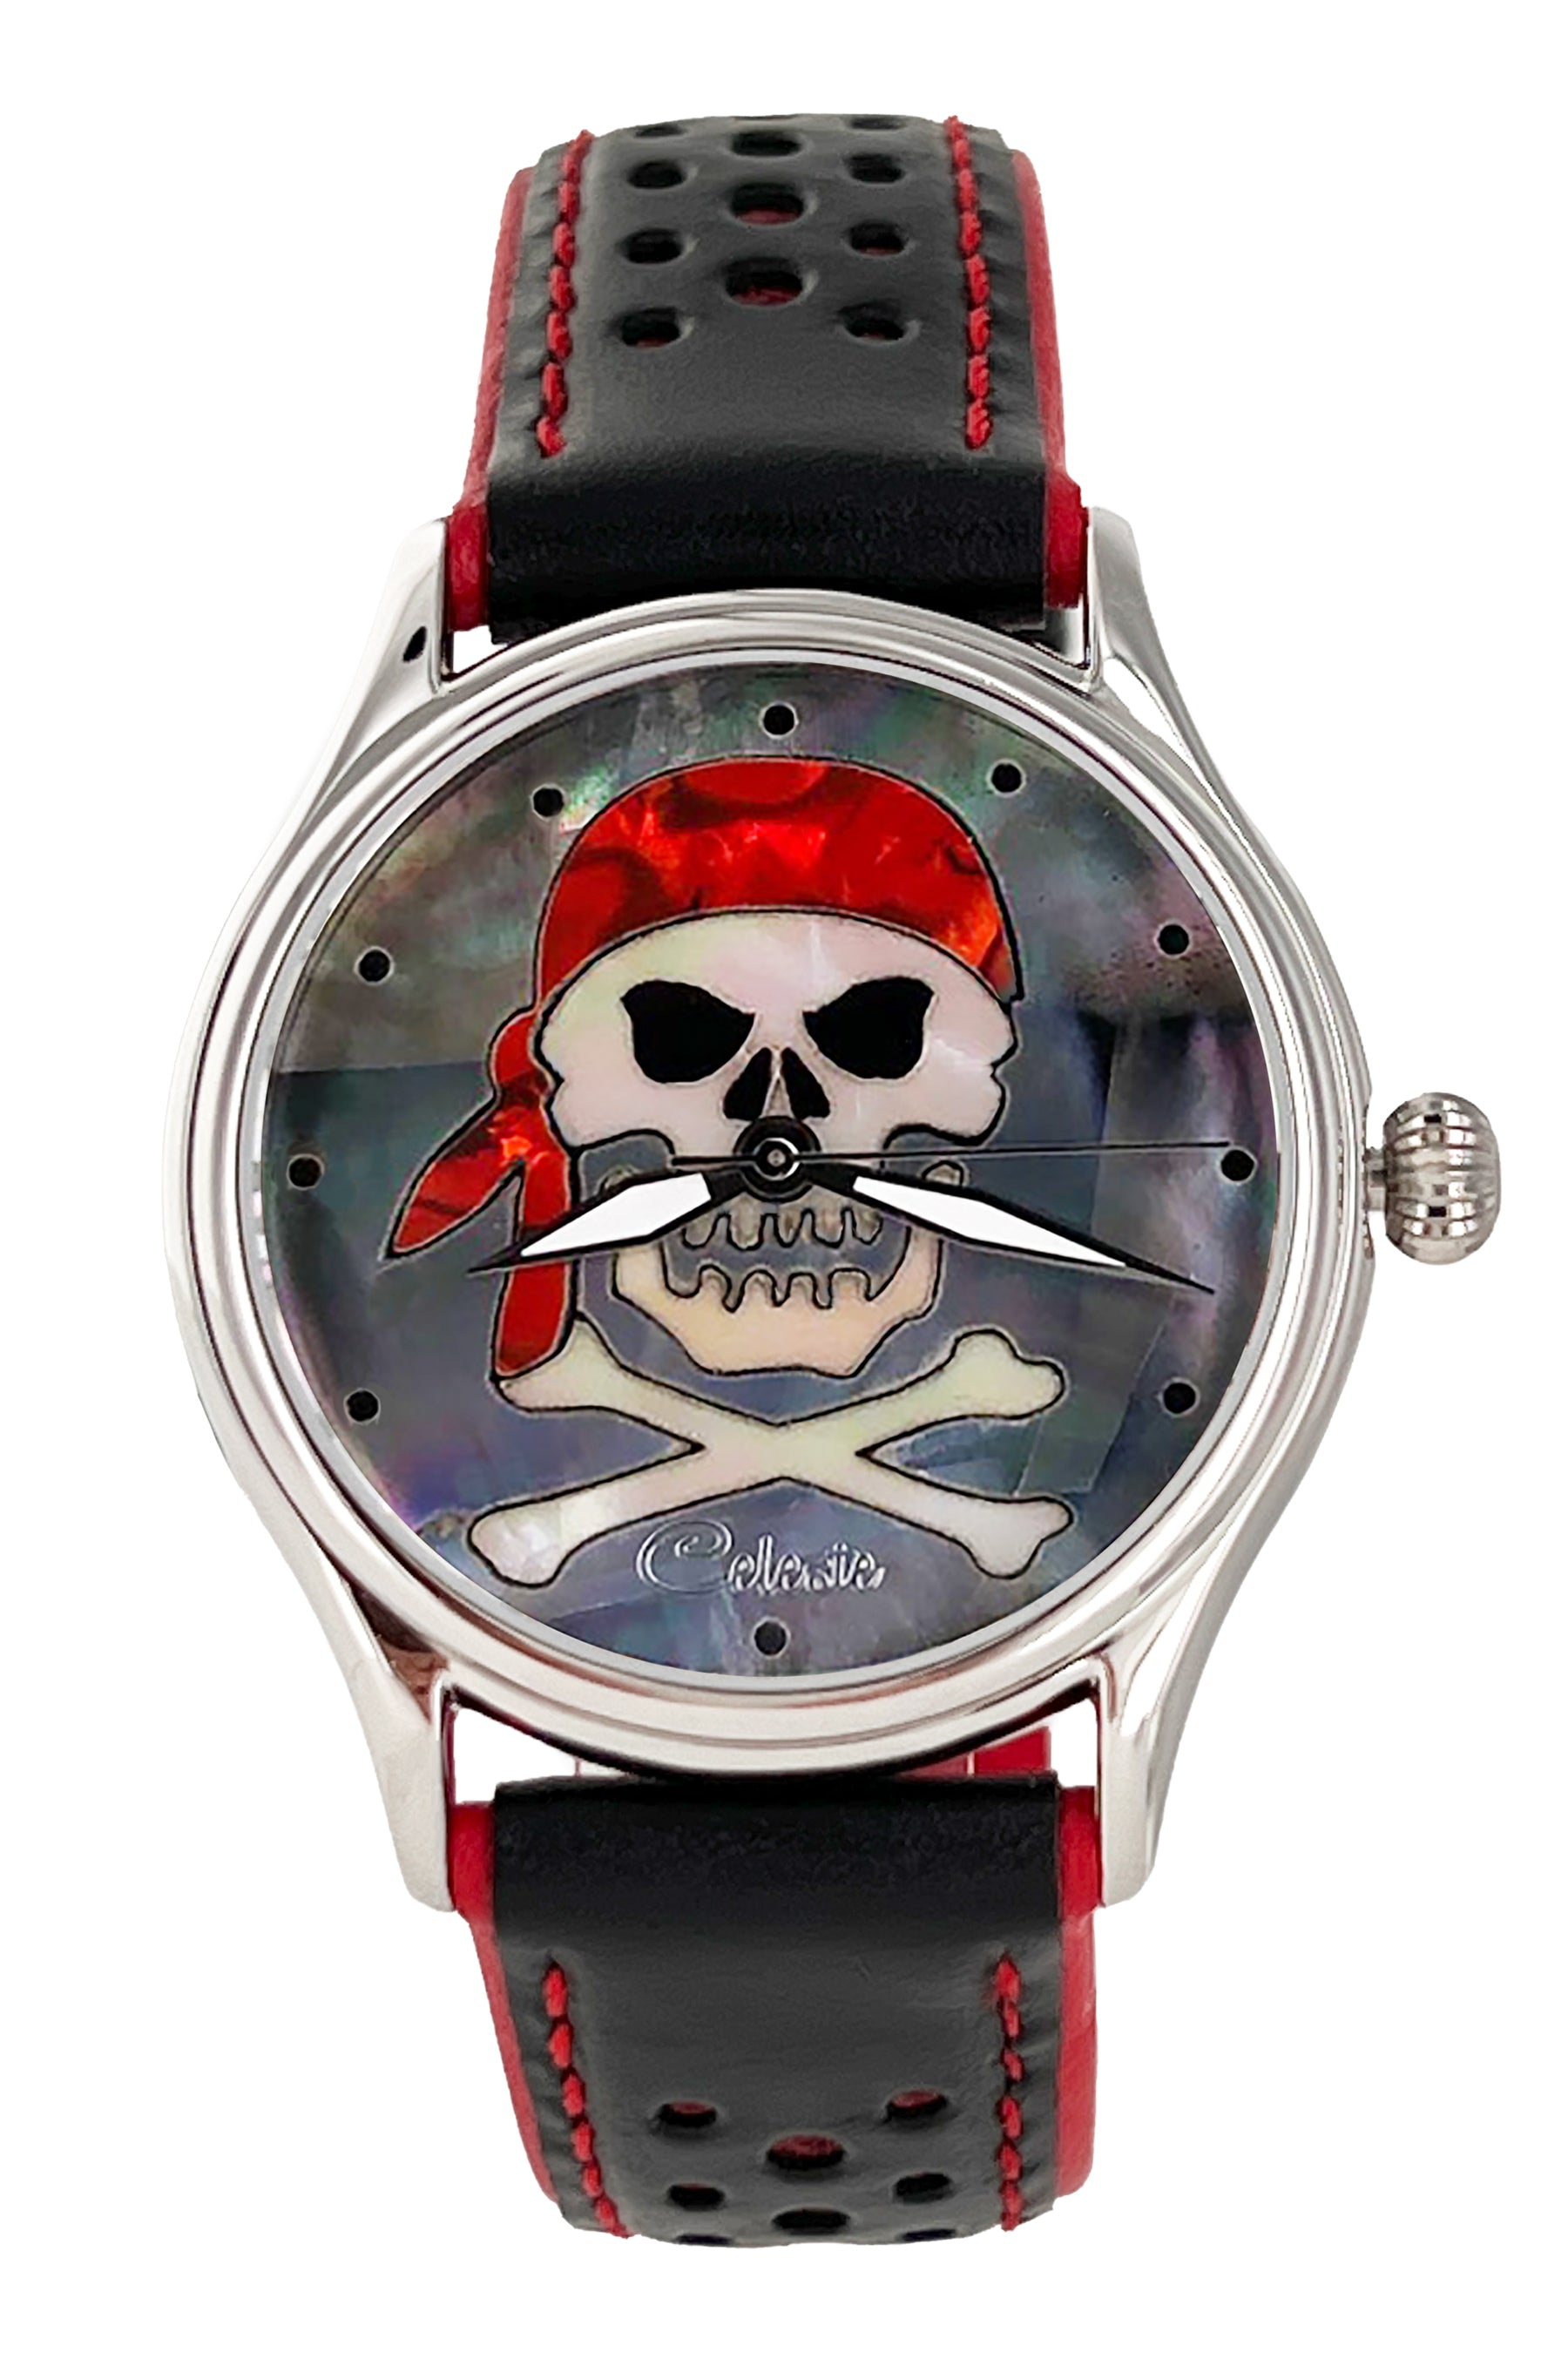 Gothic Pirate Skull Gothic Pocket Watch Classic Quartz Timepiece For Men  And Women With Necklace Chain Pendant From Akaiken, $4.83 | DHgate.Com